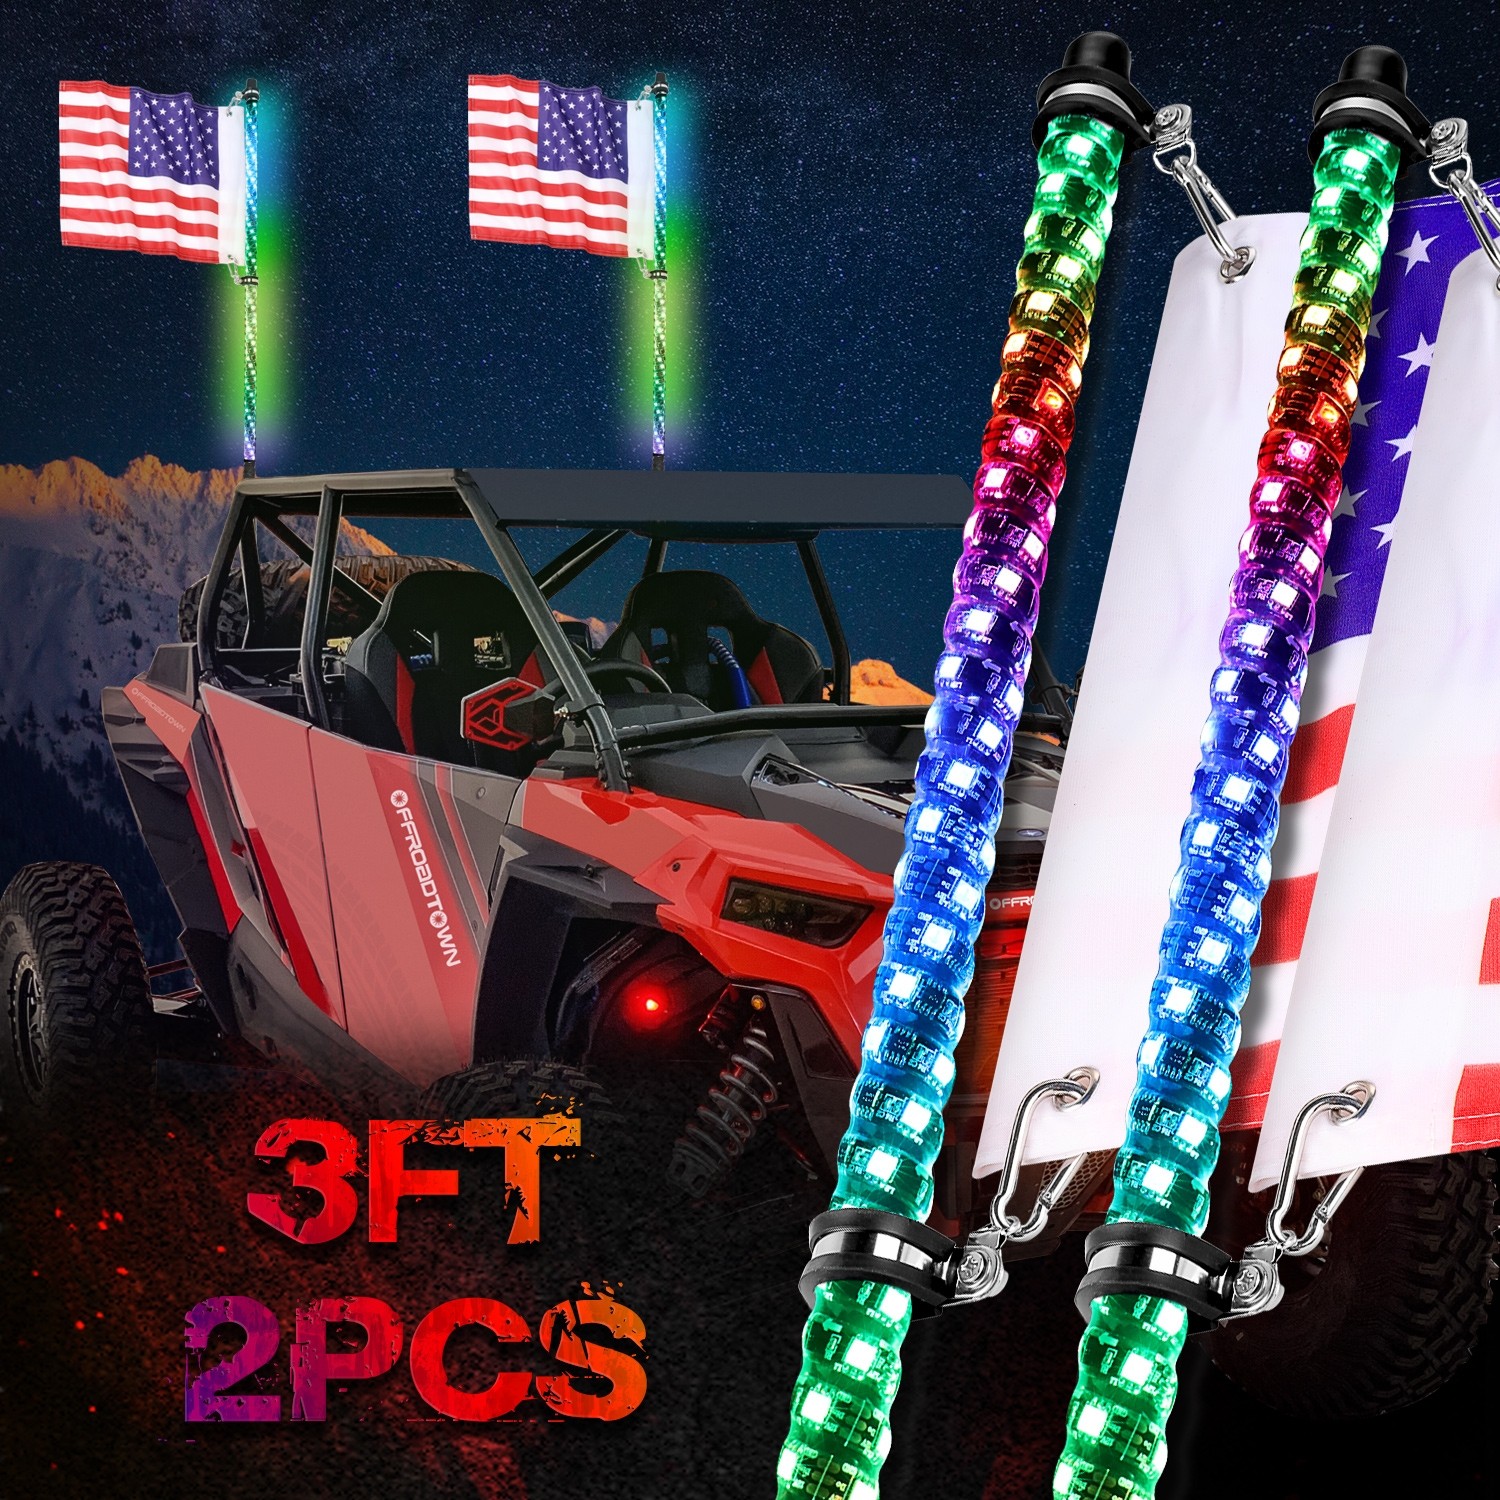 Accessories for ATV JDMON 2pc 3ft LED Whip Lights RGB Dancing/Chasing Light Application and Remote Control 360° Spiral Whip Lights w/Flag 366 Modes/300 Colors/Weatherproof Lighted Antenna Whips 